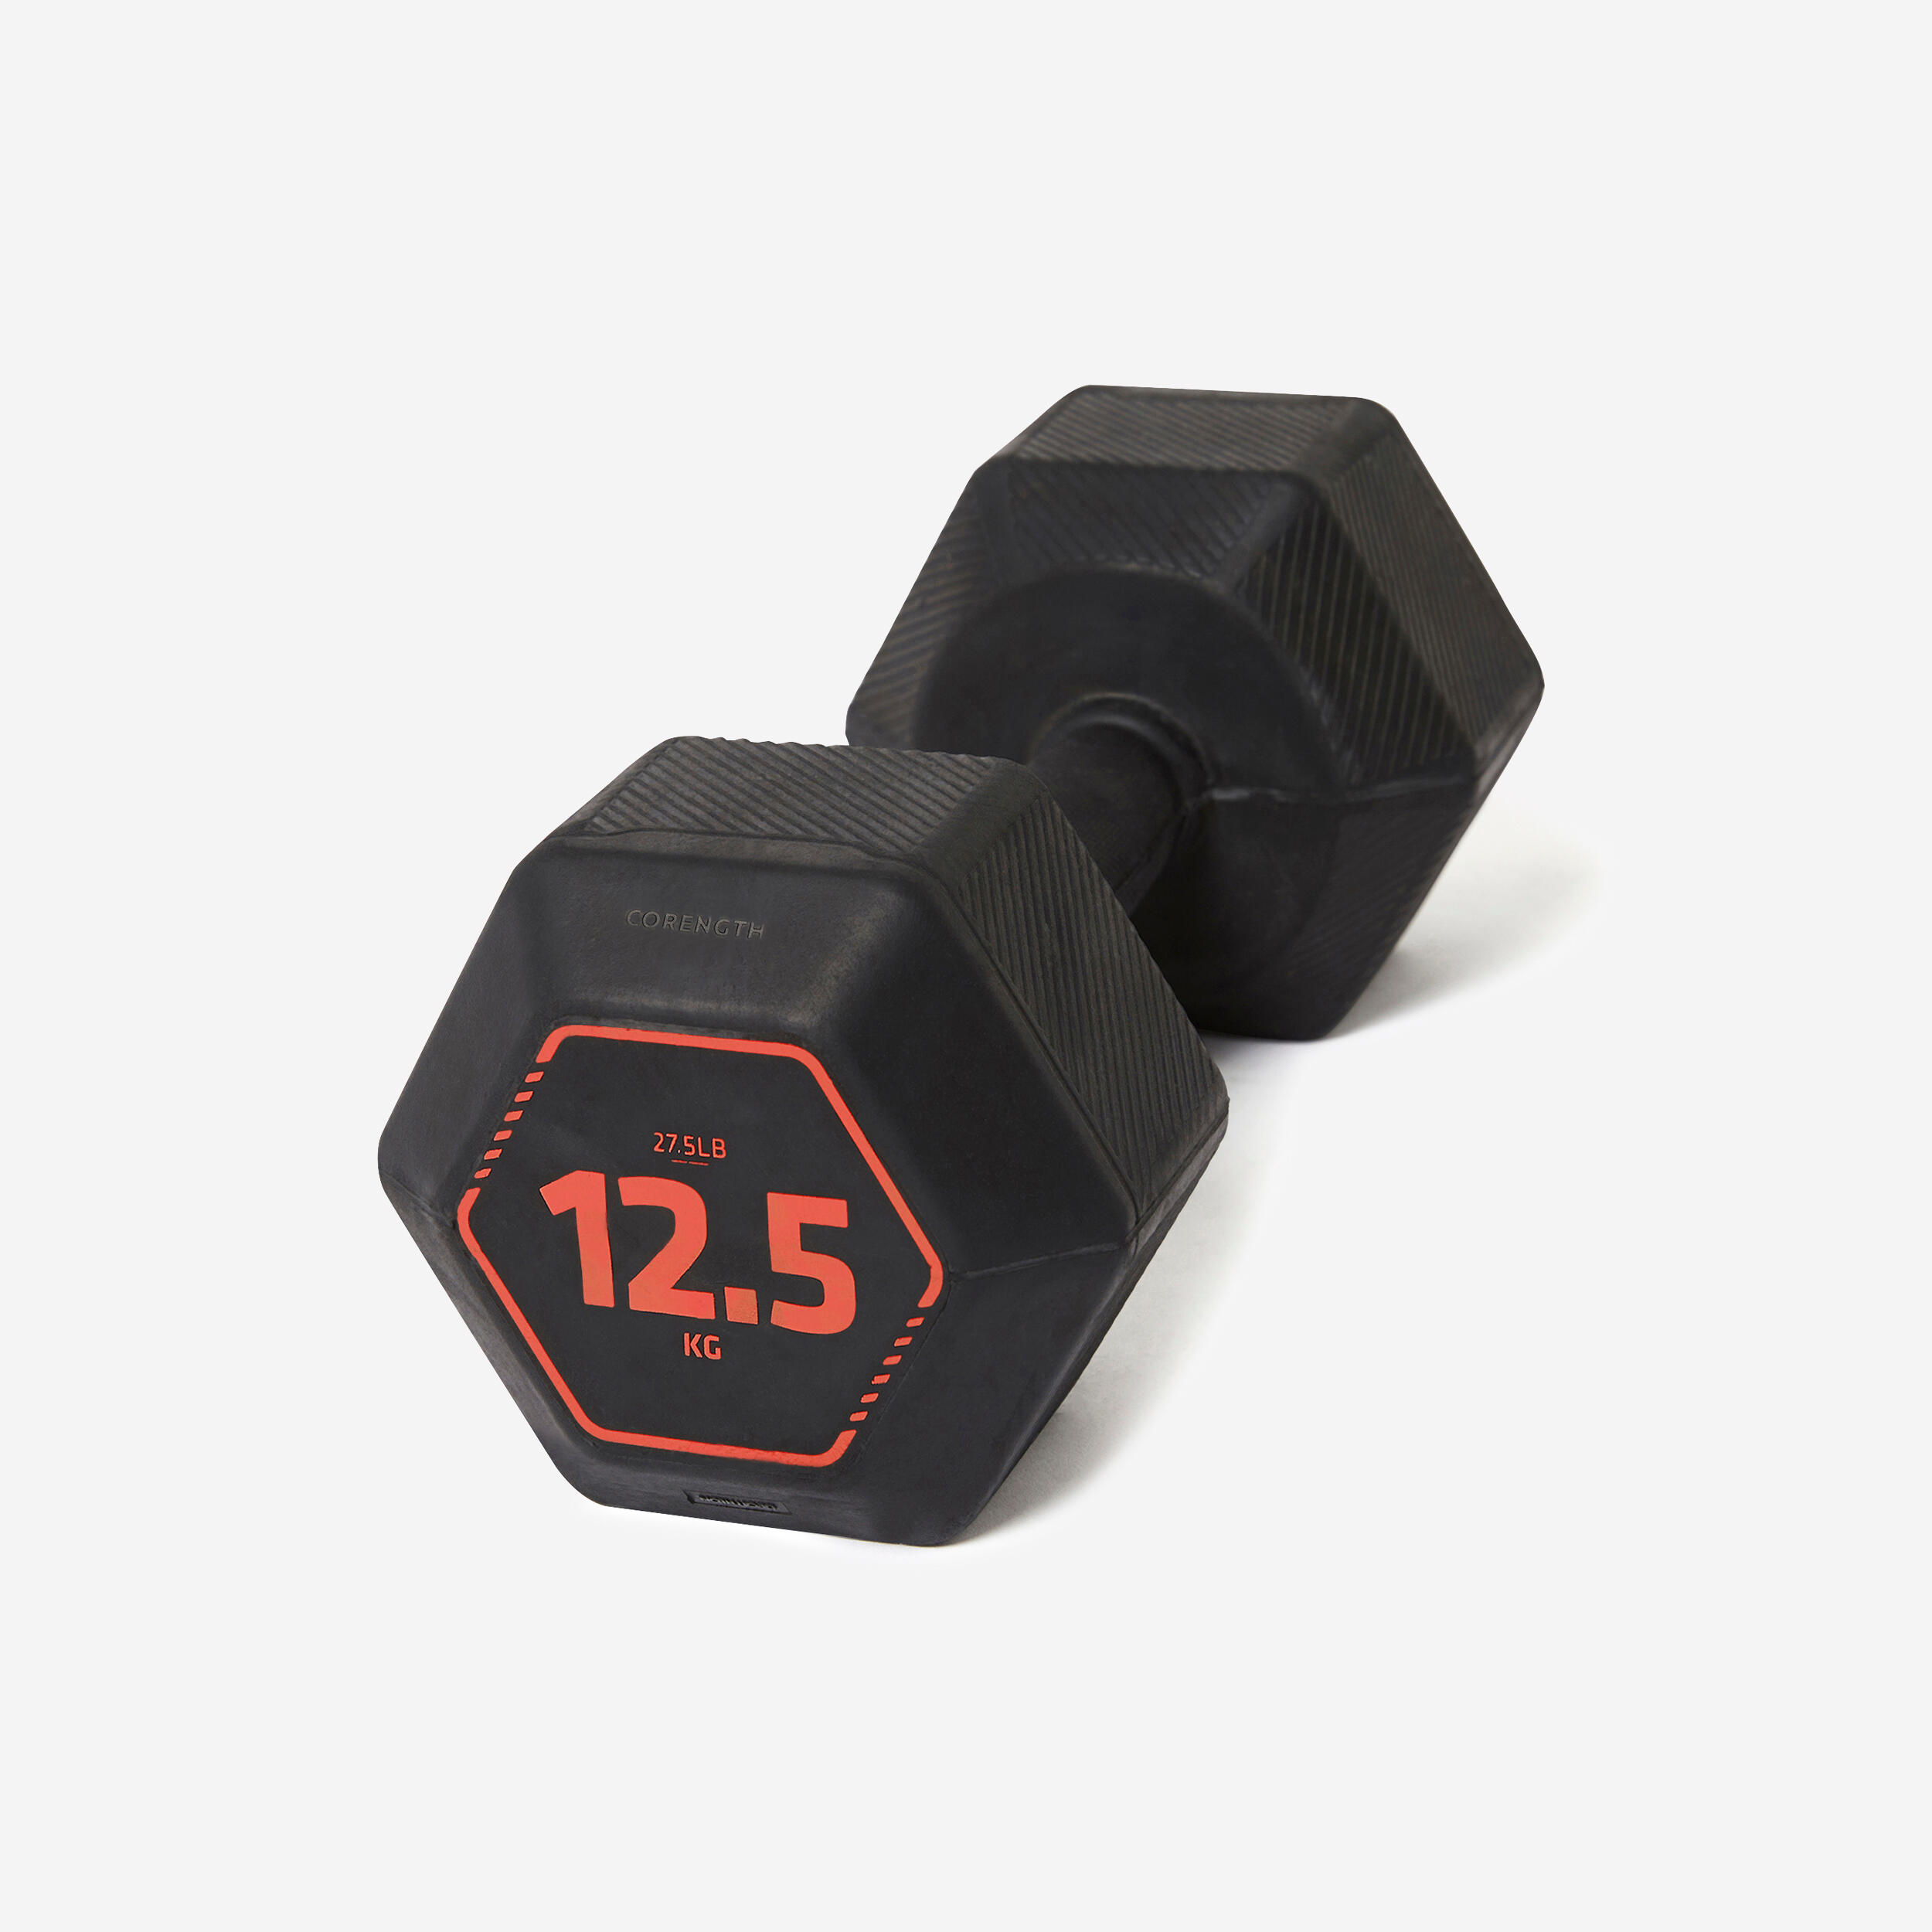 CORENGTH Cross Training and Weight Training Hex Dumbbells 12.5 kg - Black